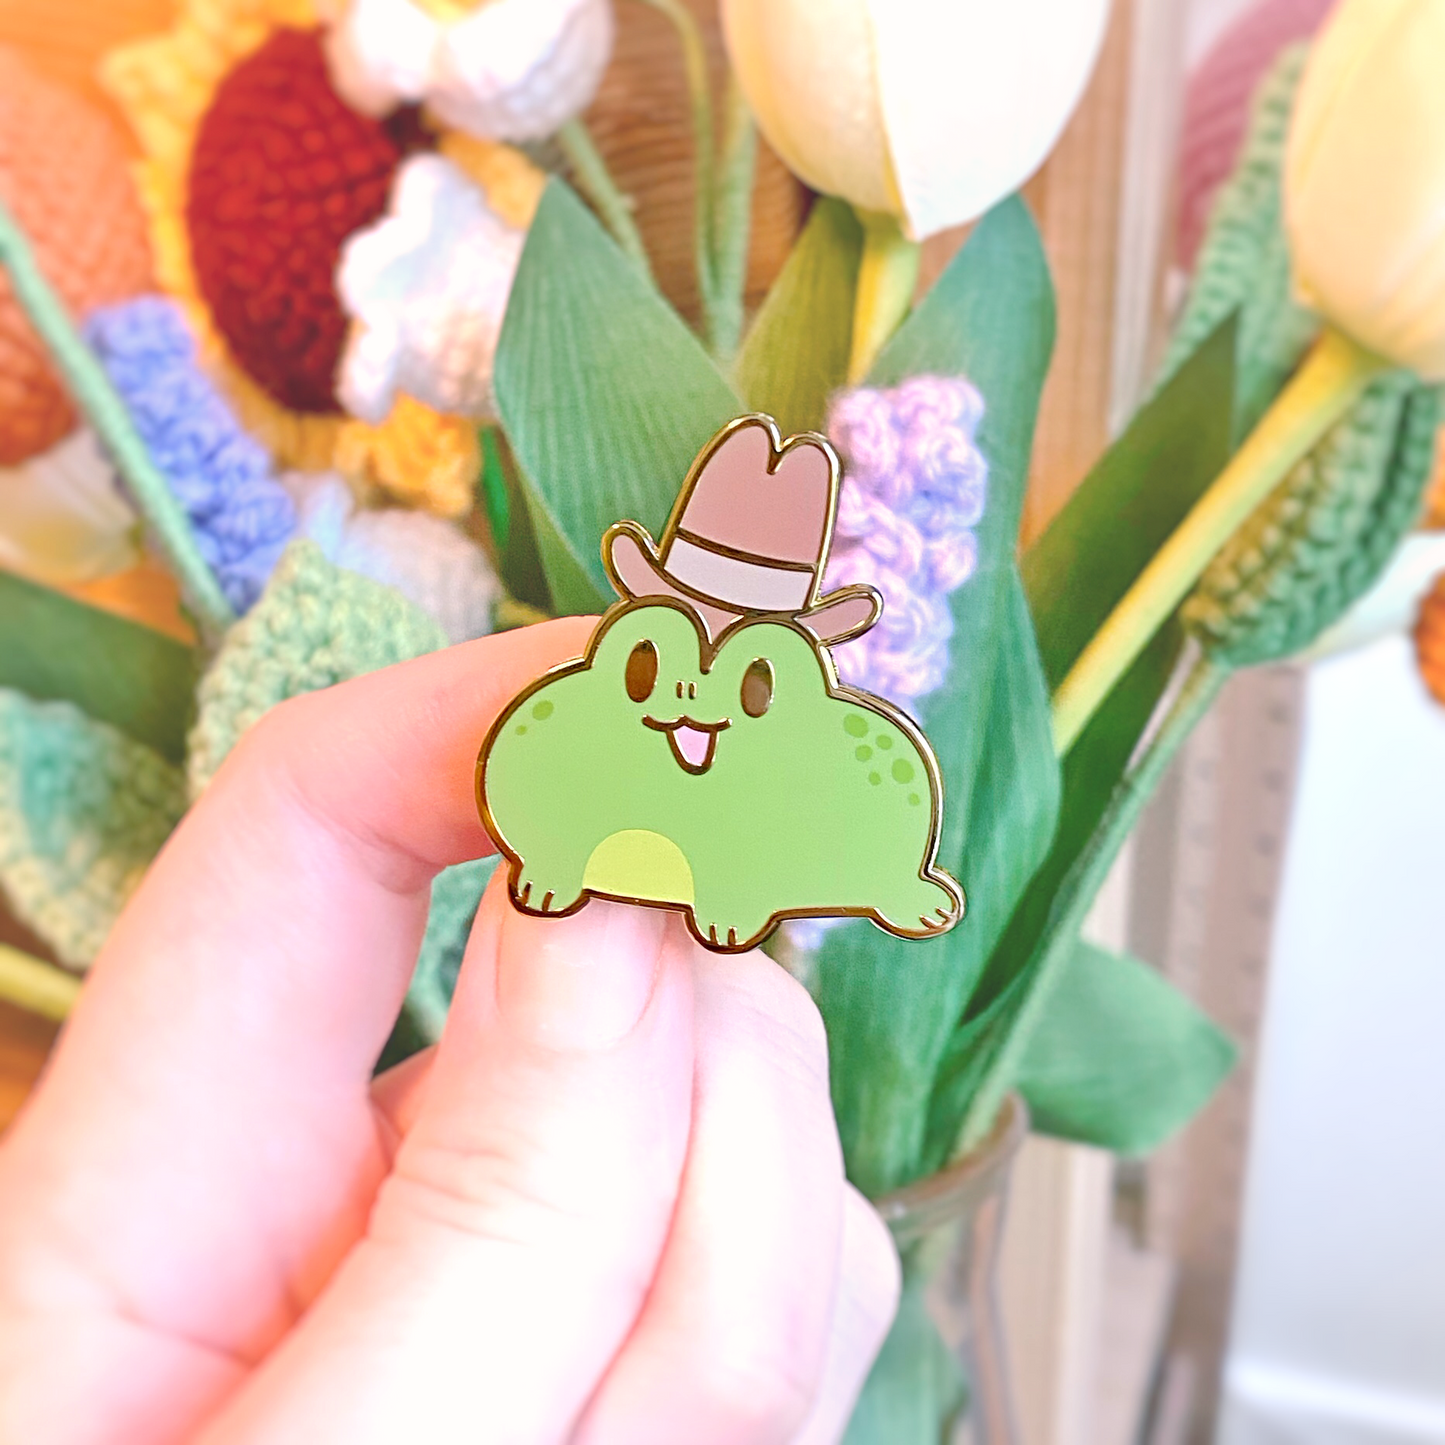 Gold plated enamel pin of a bight green frog smiling with an open mouth wearing a tall brown cowboy hat. Photographed against fake green plants and pastel crocheted flowers.